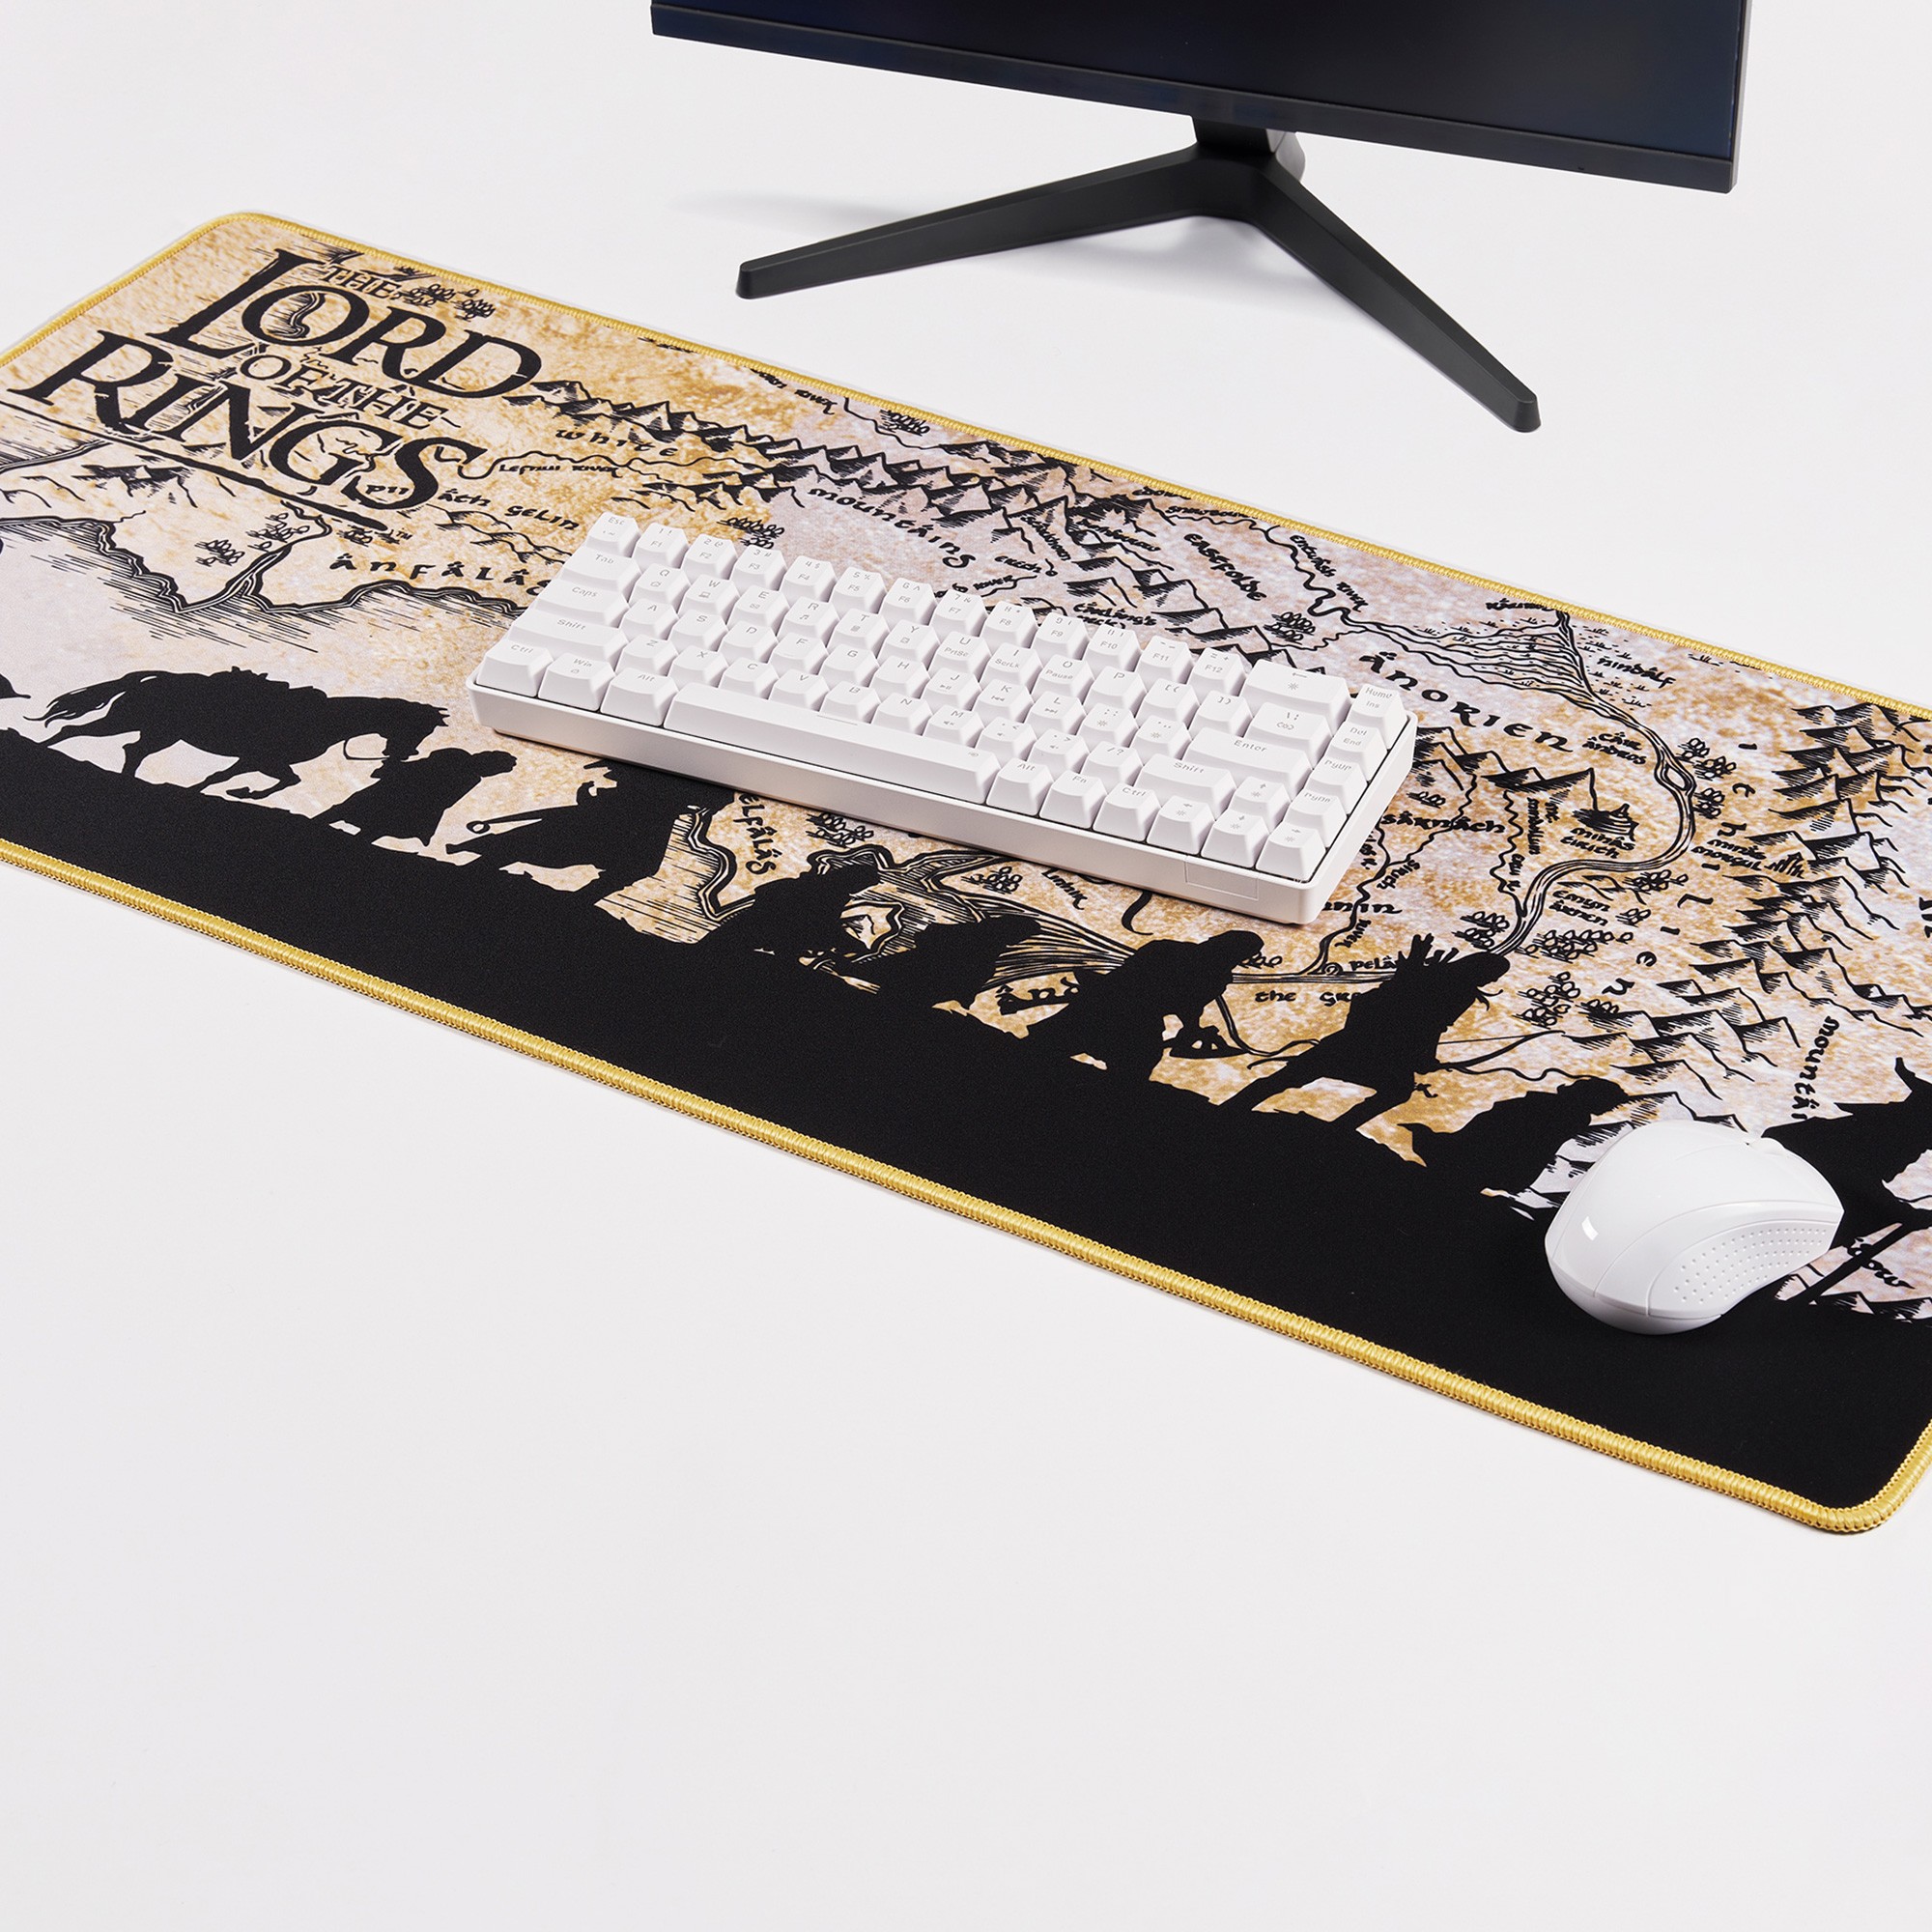 XXXXL mouse pad - Lord of the Rings desk mat